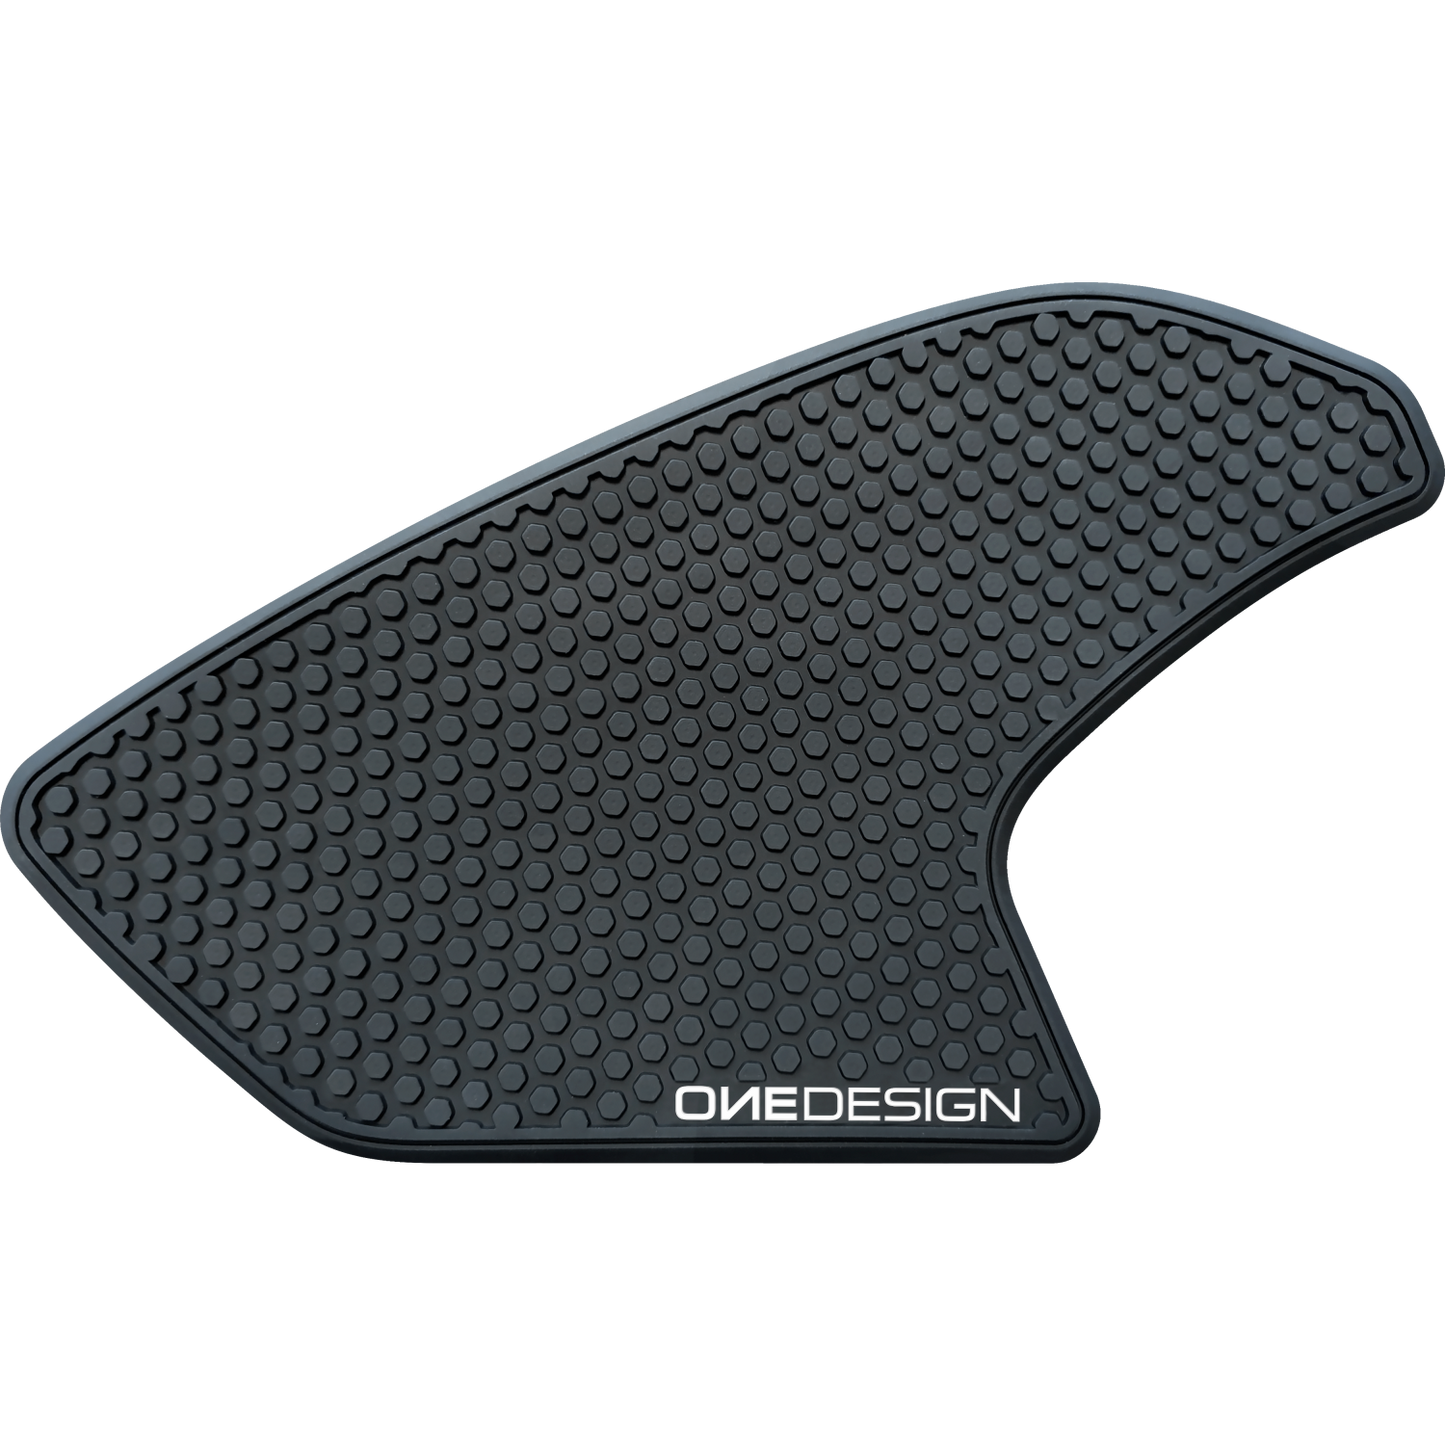 OneDesign Tank Grip For BMW R 1200 GS (2013-18) onedesign